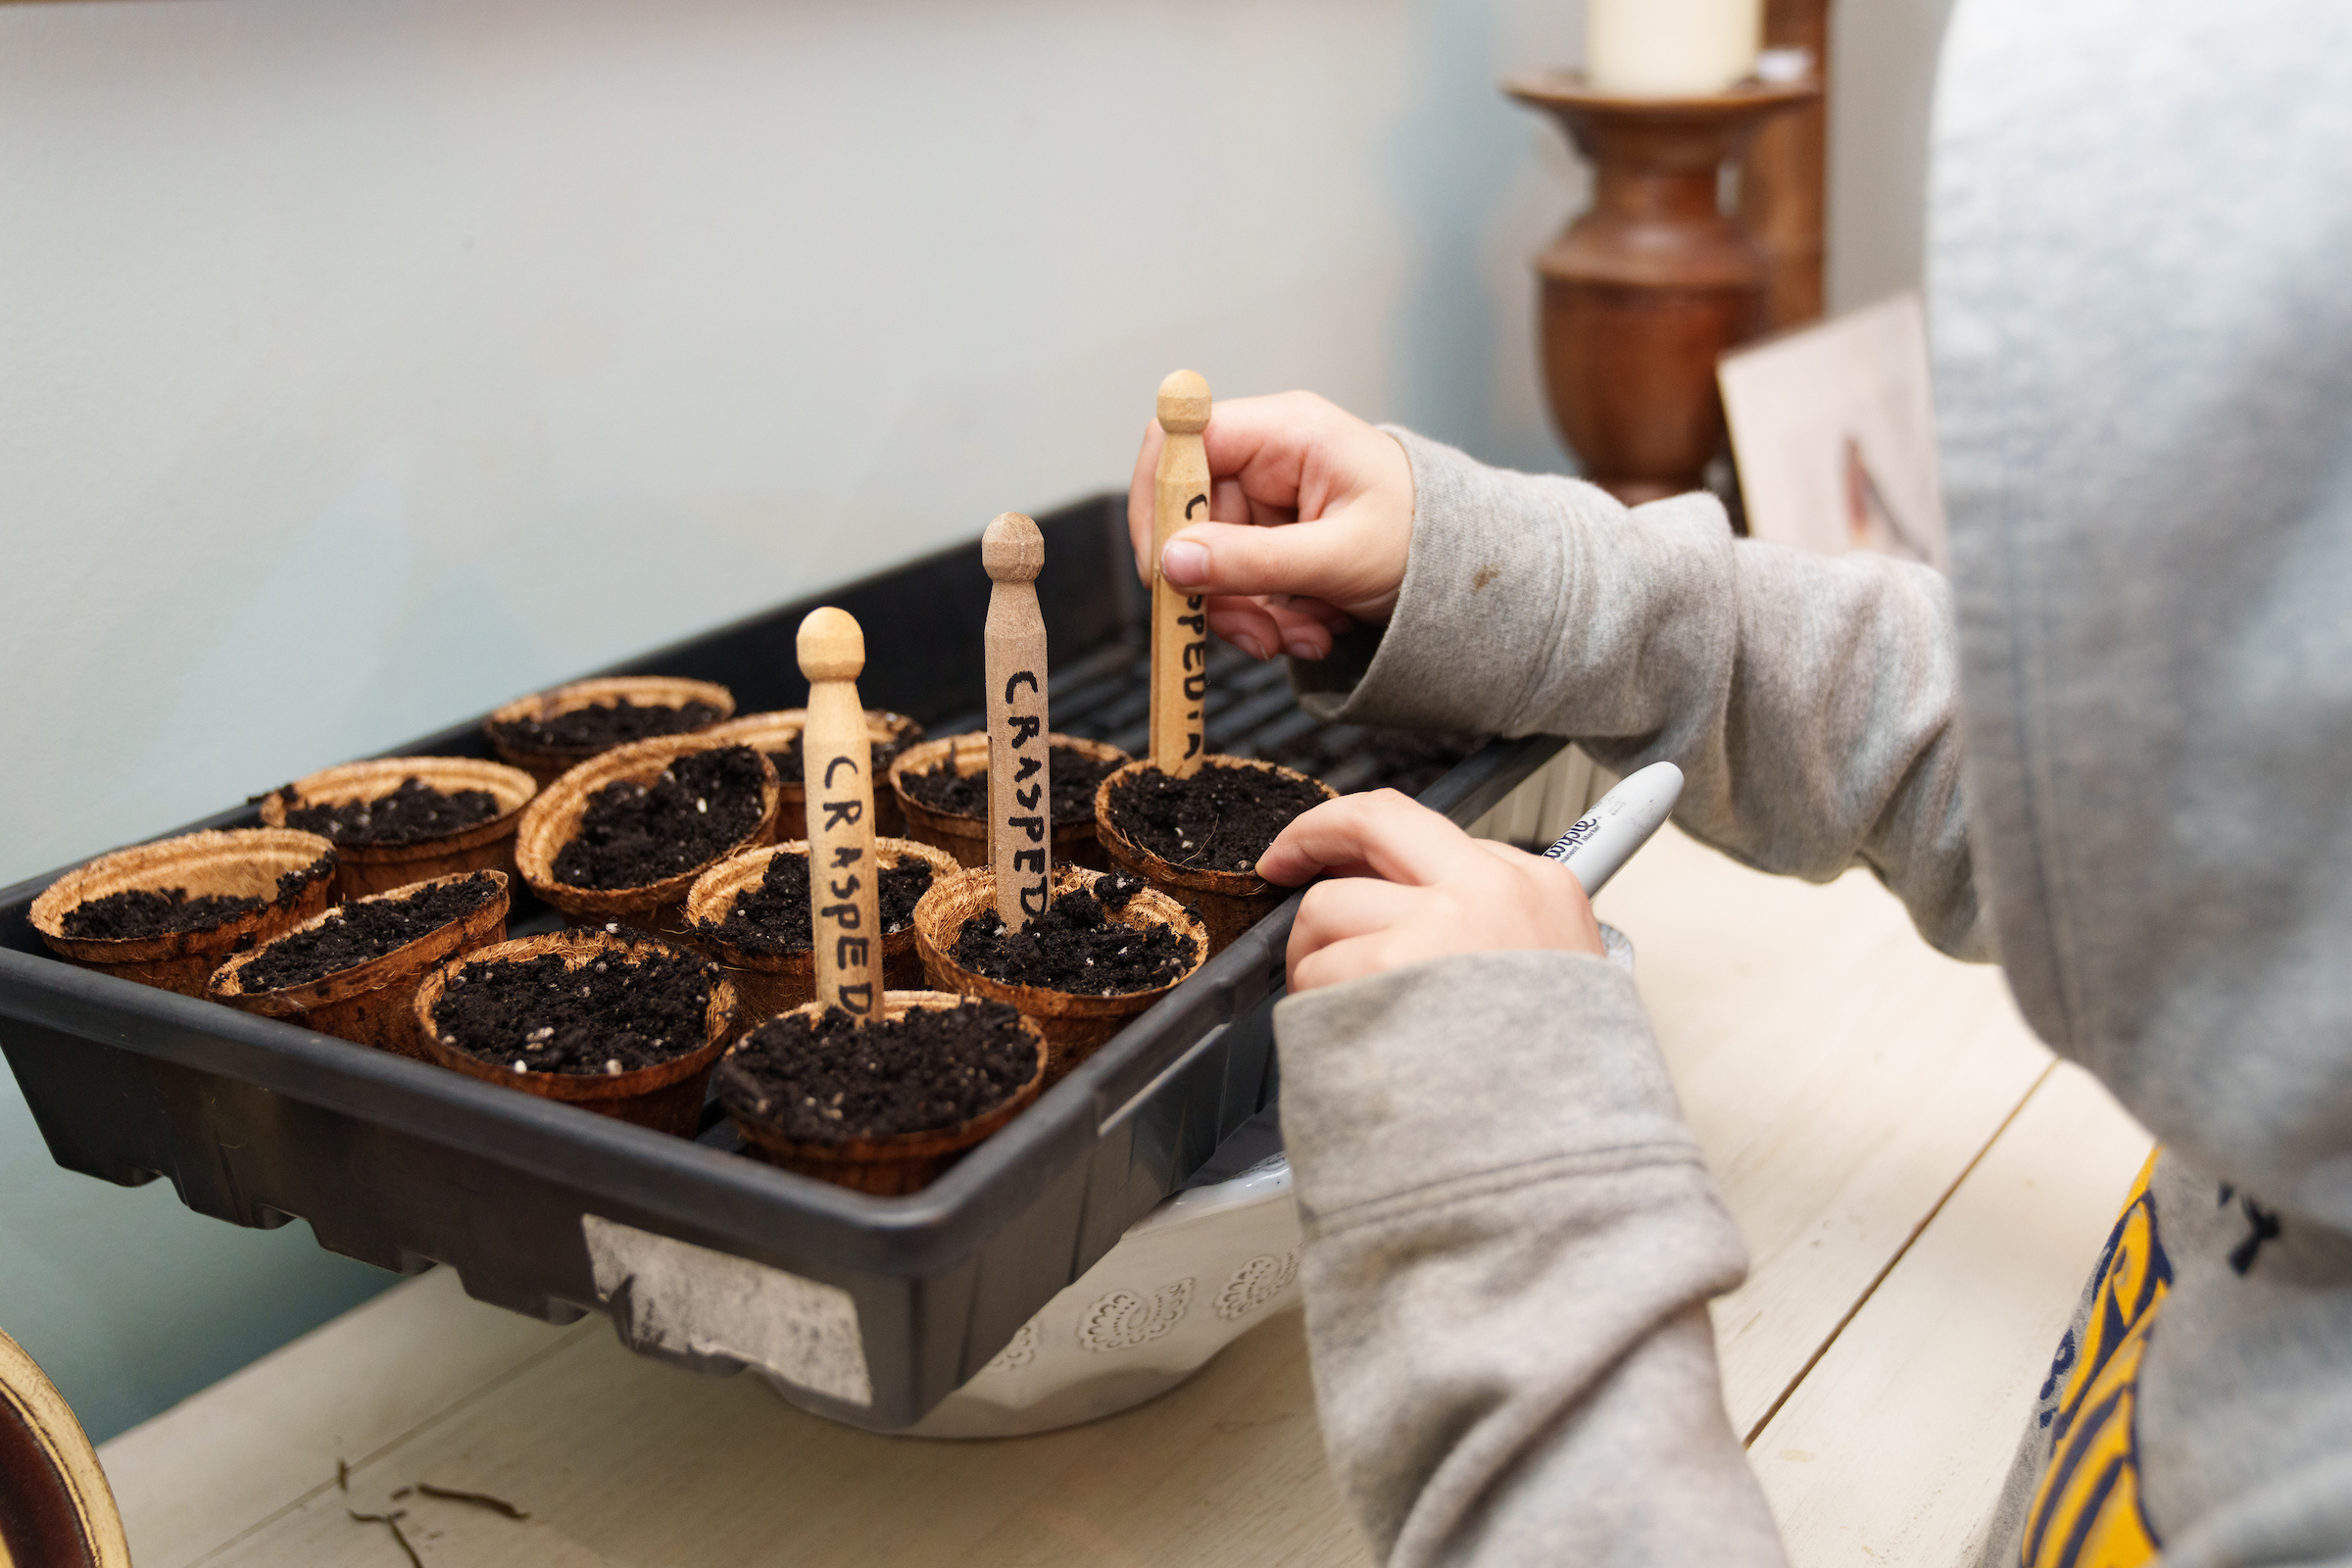 Seedling starters are an annual tradition in the Sanicola household. LORI HAWKINS